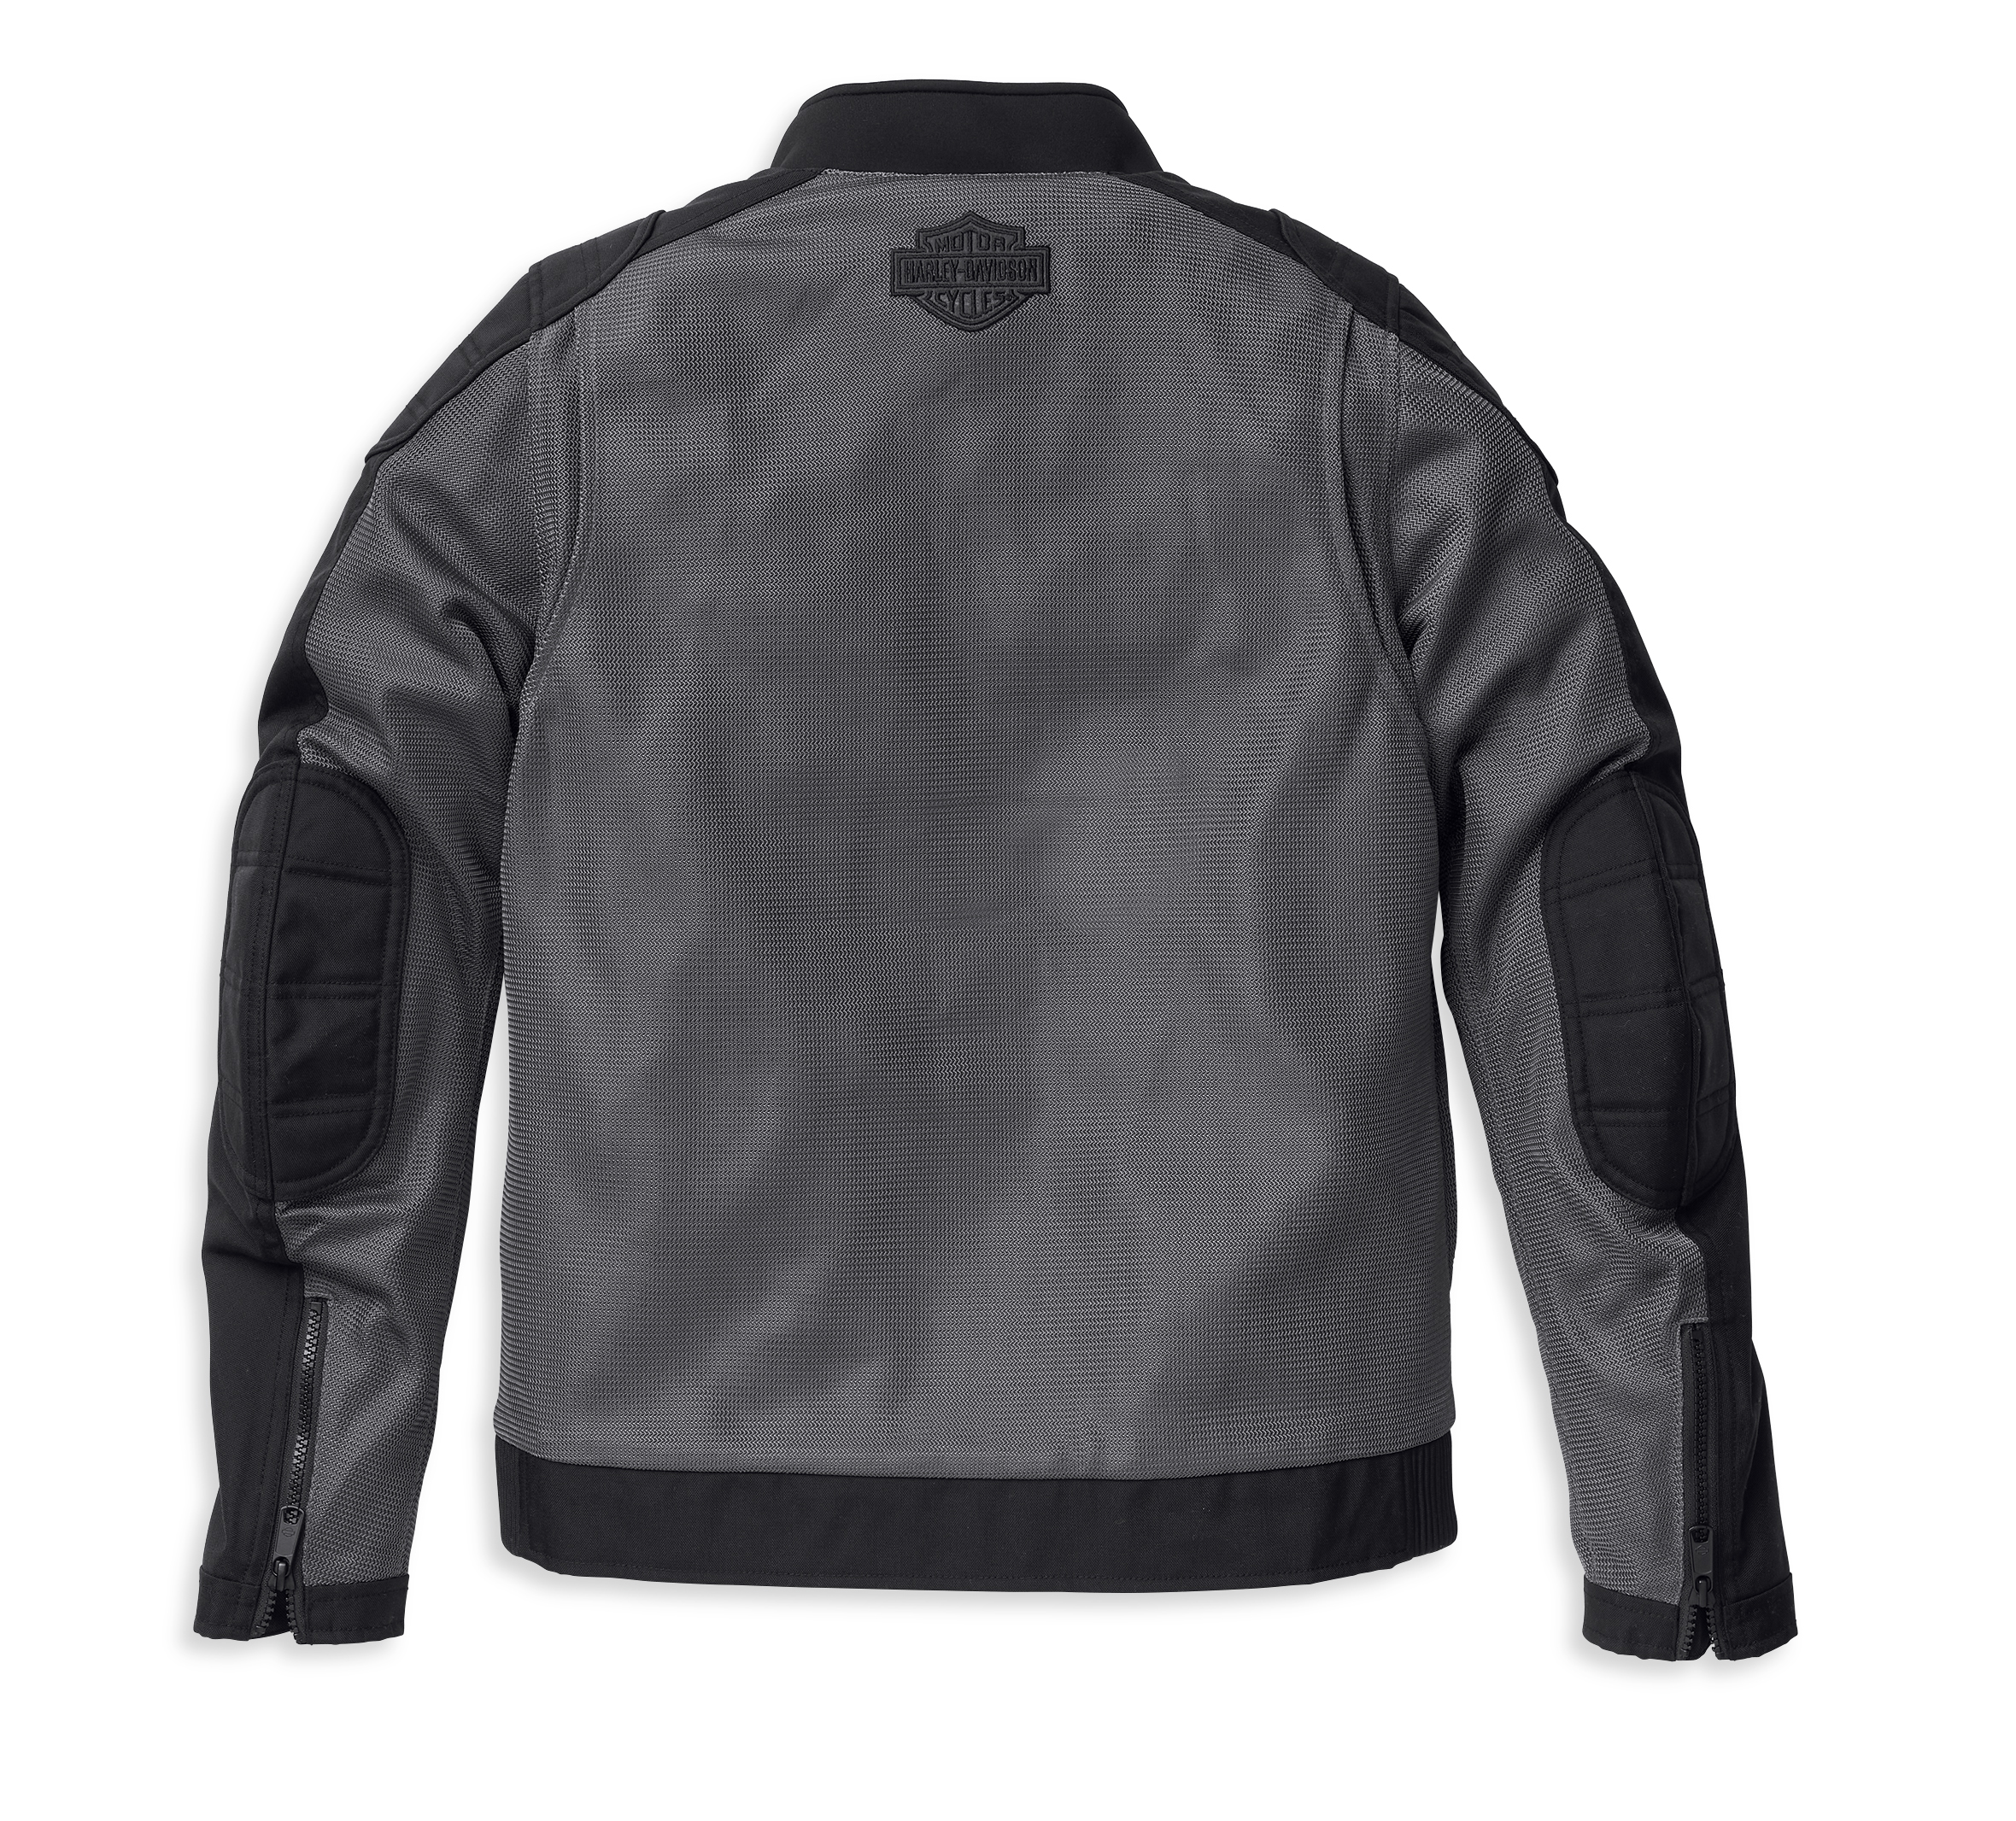 Women's Zephyr Mesh Riding Jacket w/ Zip-out Liner | Harley 